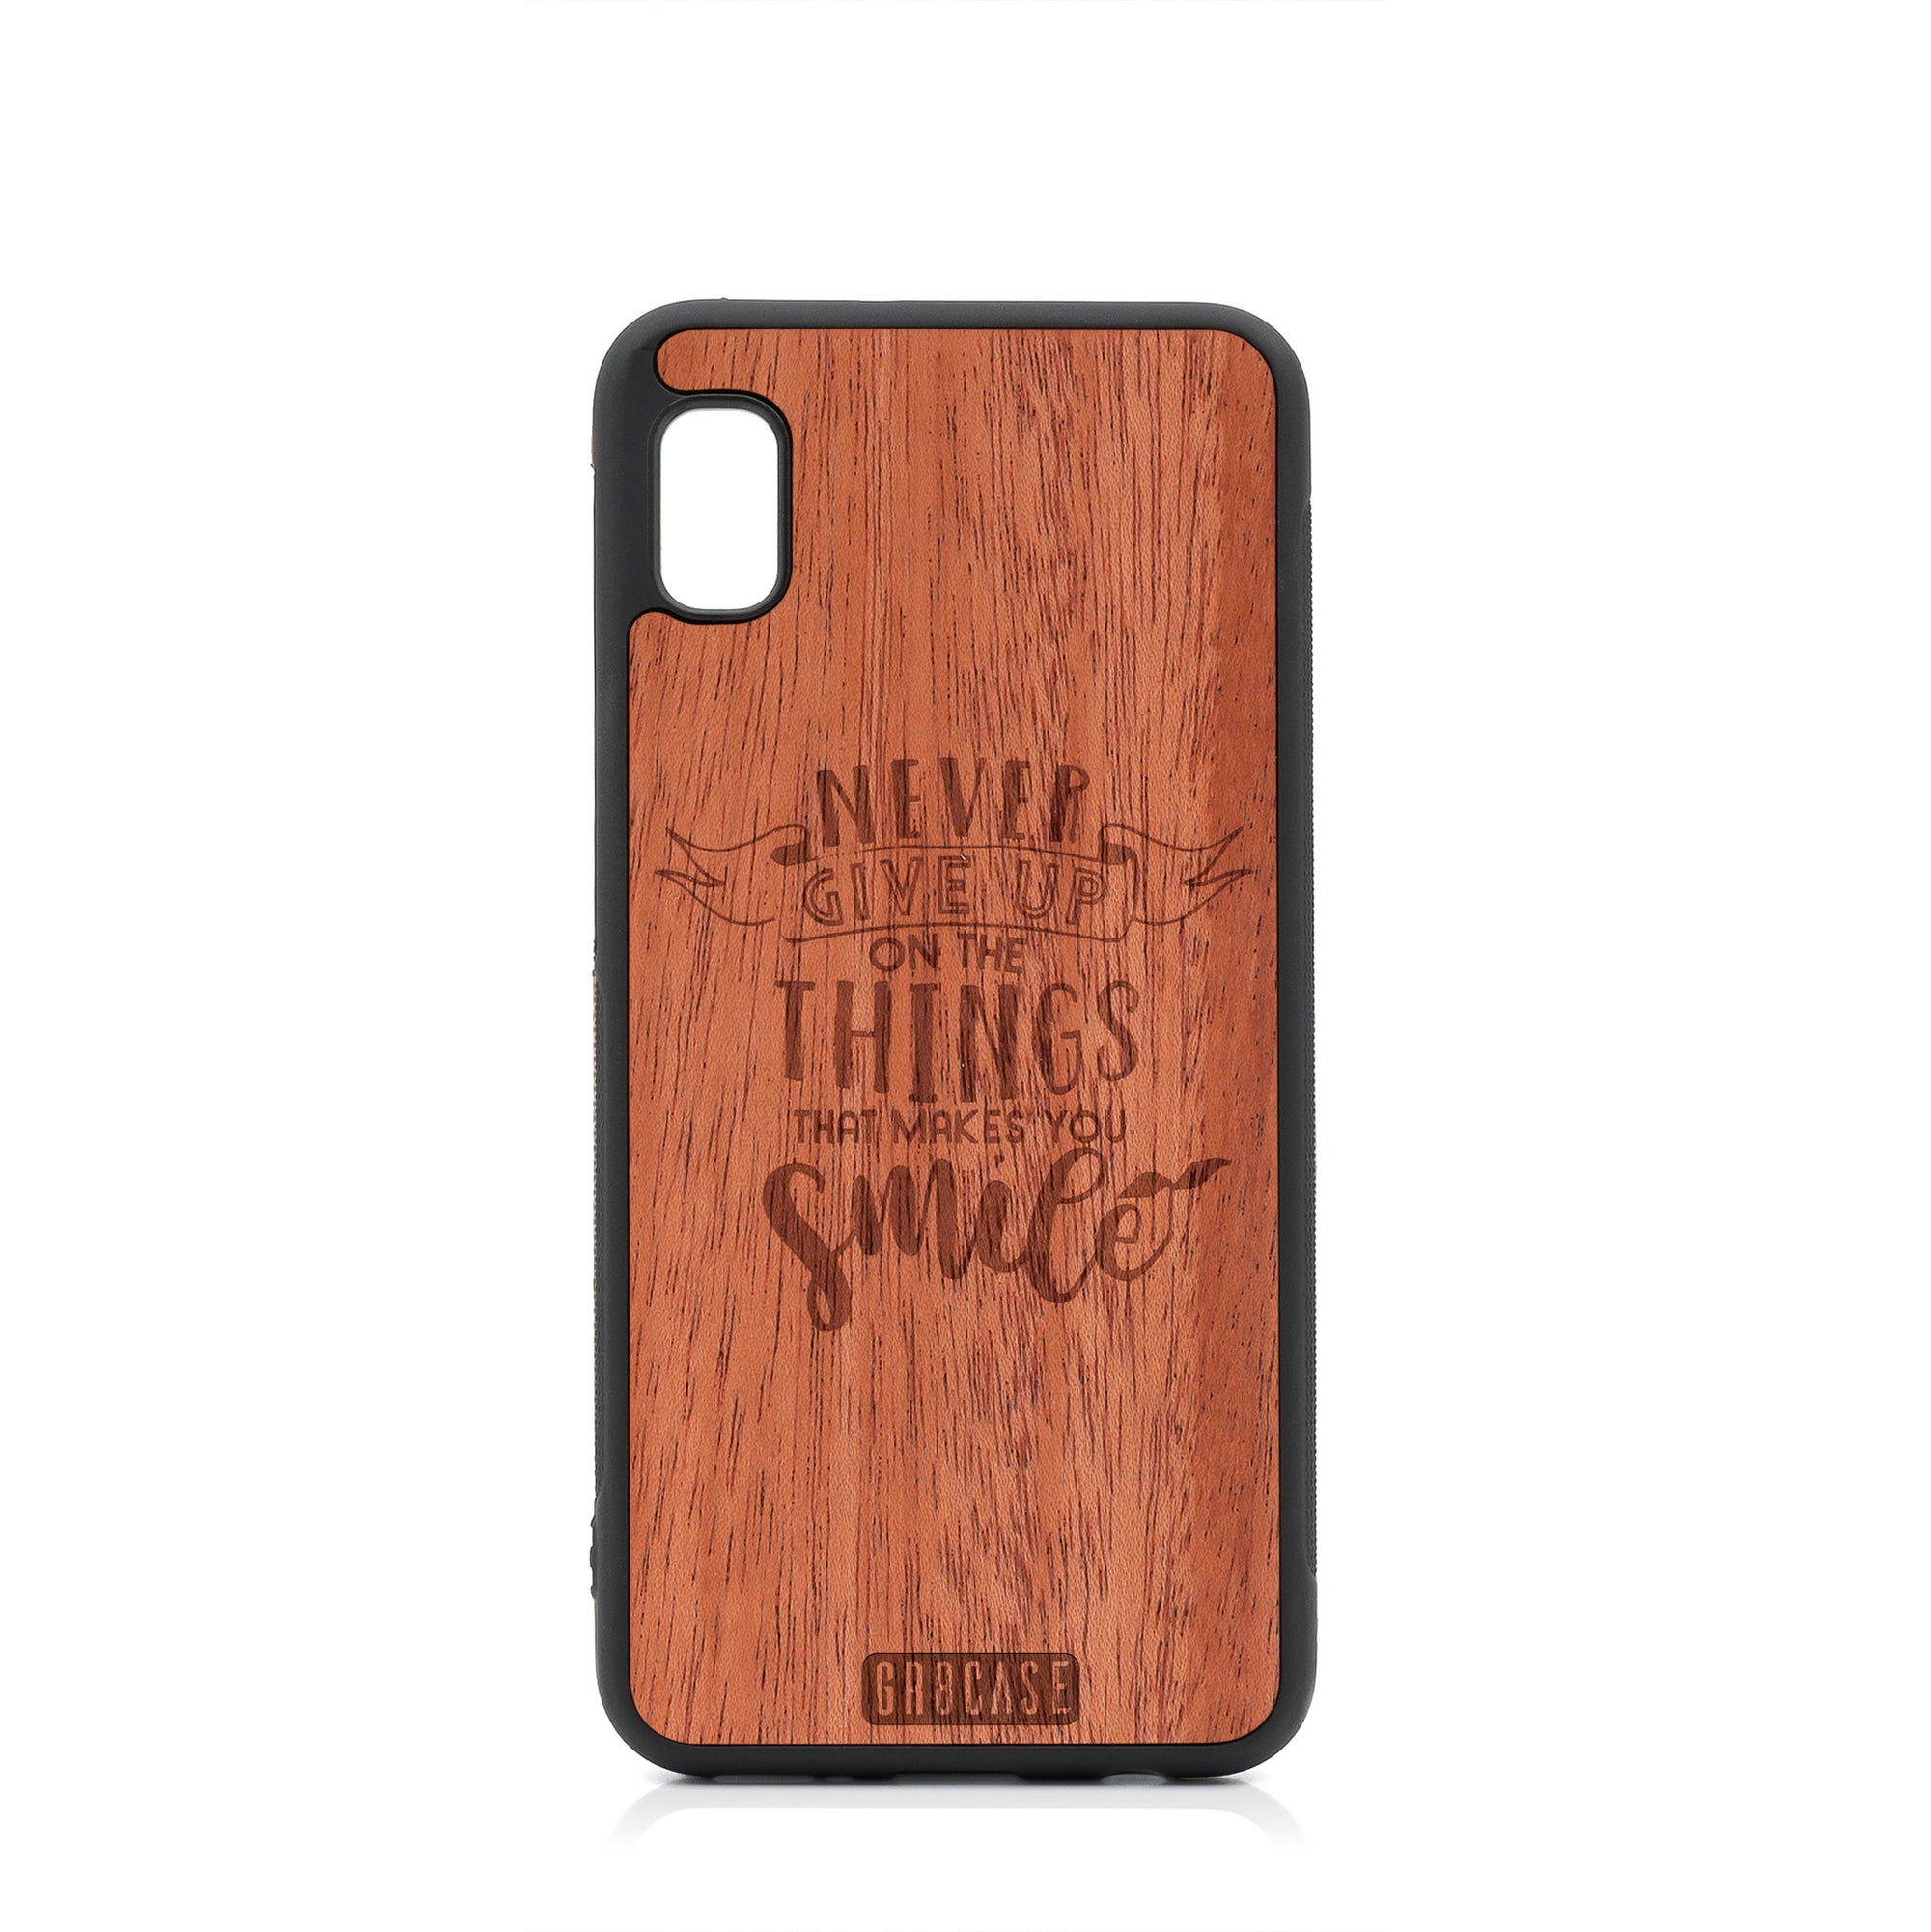 Never Give Up On The Things That Makes You Smile Design Wood Case For Samsung Galaxy A10E by GR8CASE